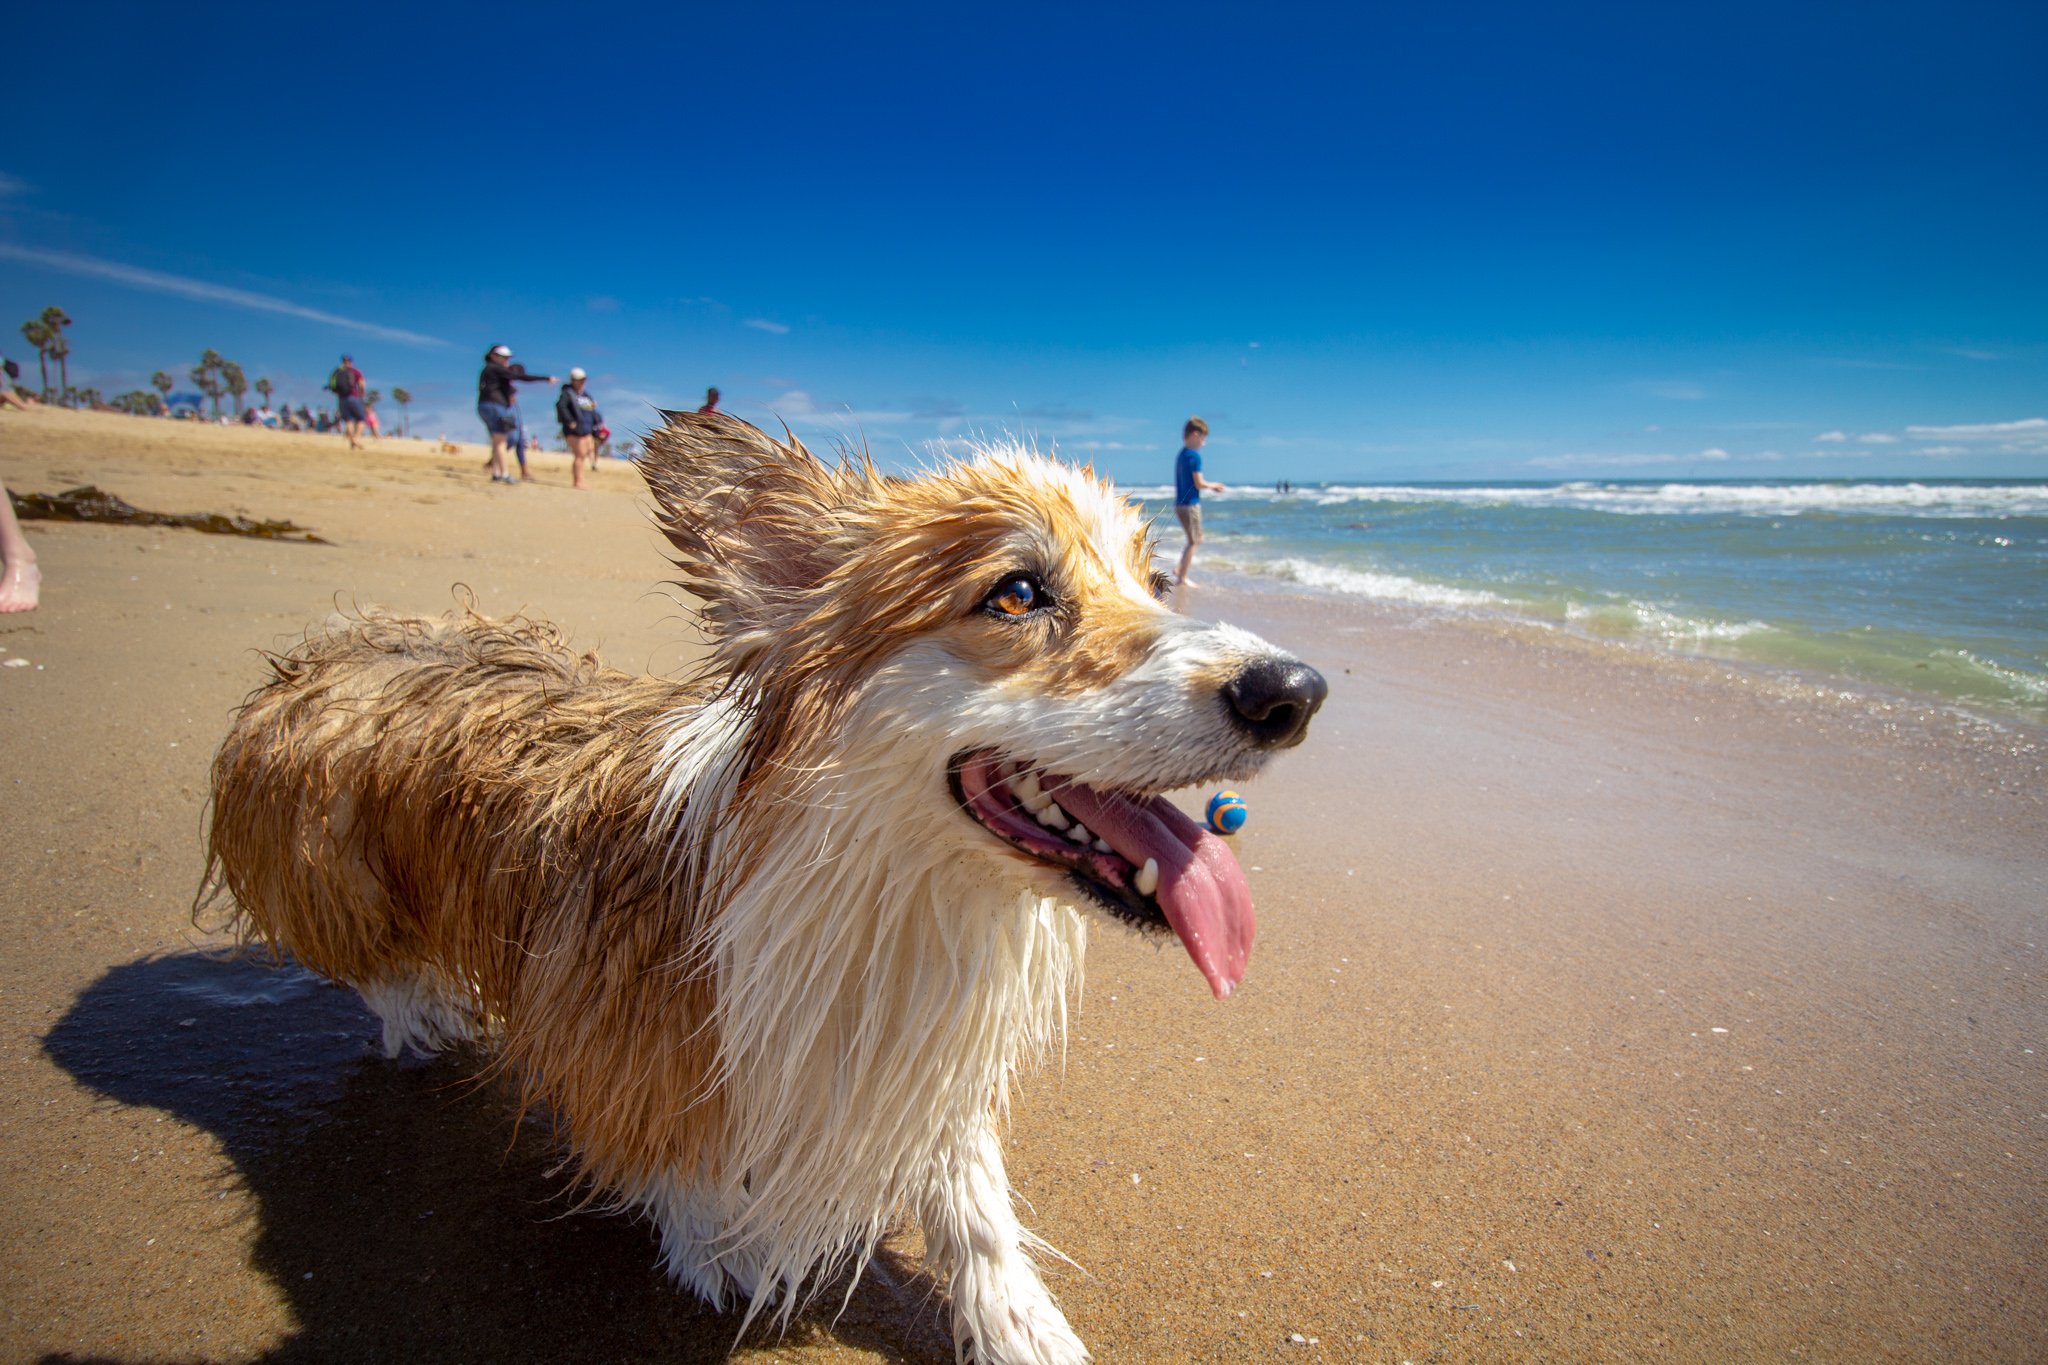 Orange County Pet and Dog Photography - by Steamer Lee - Corgi Beach Day Spring 2019 - Southern Caliornia 58 (2).JPG